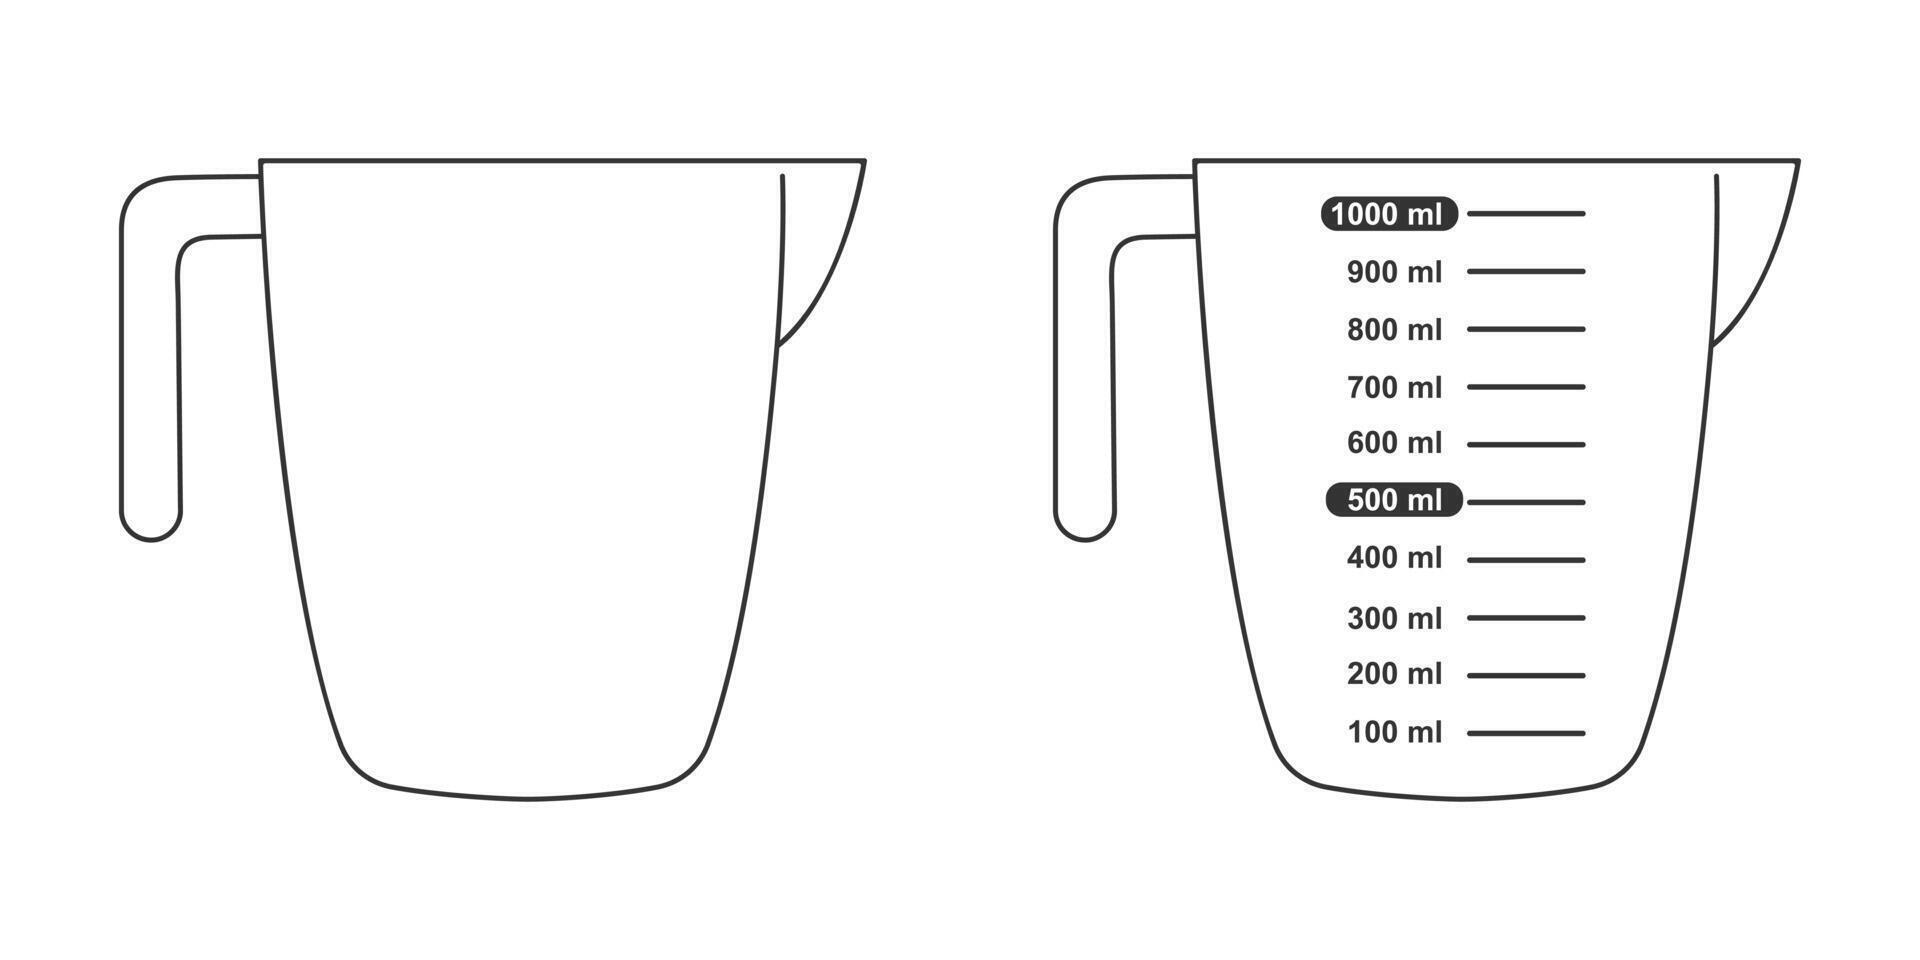 1 liter volume measuring cups with and without capacity scale. Liquid containers for cooking vector